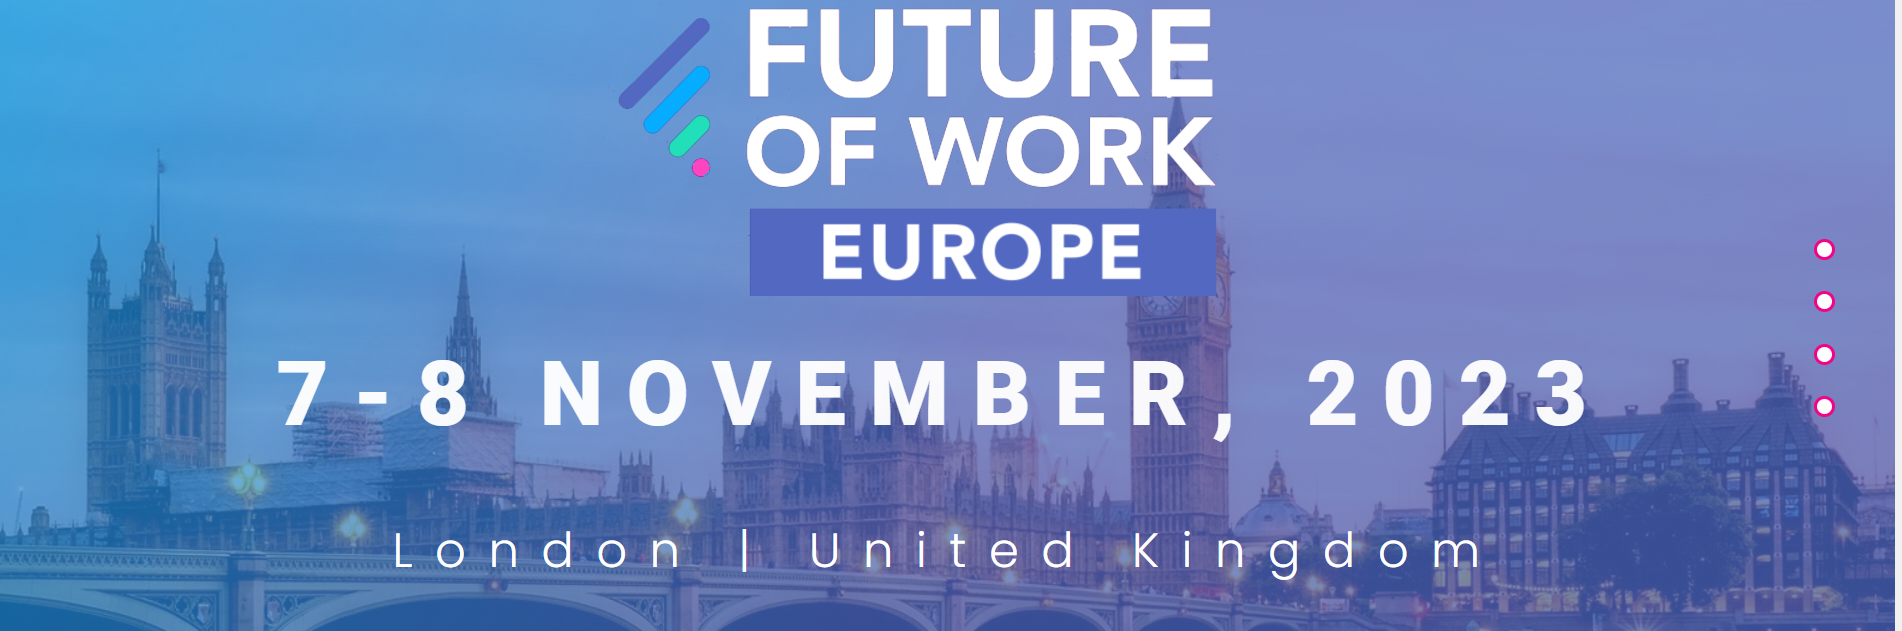 Future of Work Europe HR event